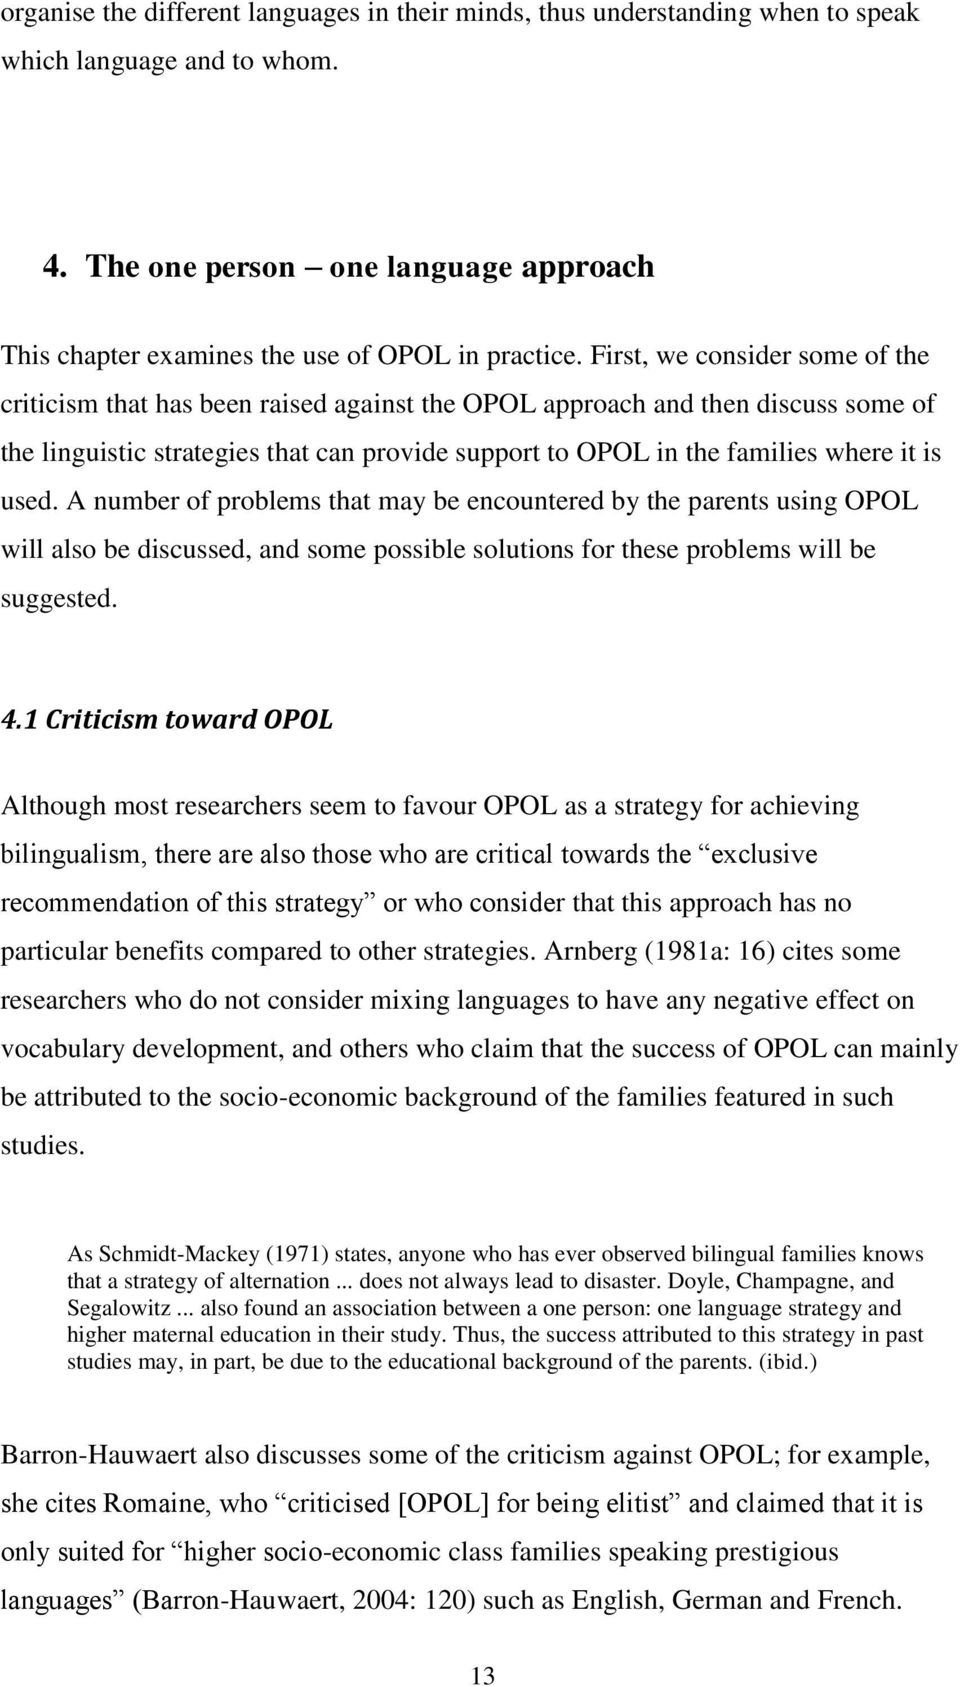 used. A number of problems that may be encountered by the parents using OPOL will also be discussed, and some possible solutions for these problems will be suggested. 4.